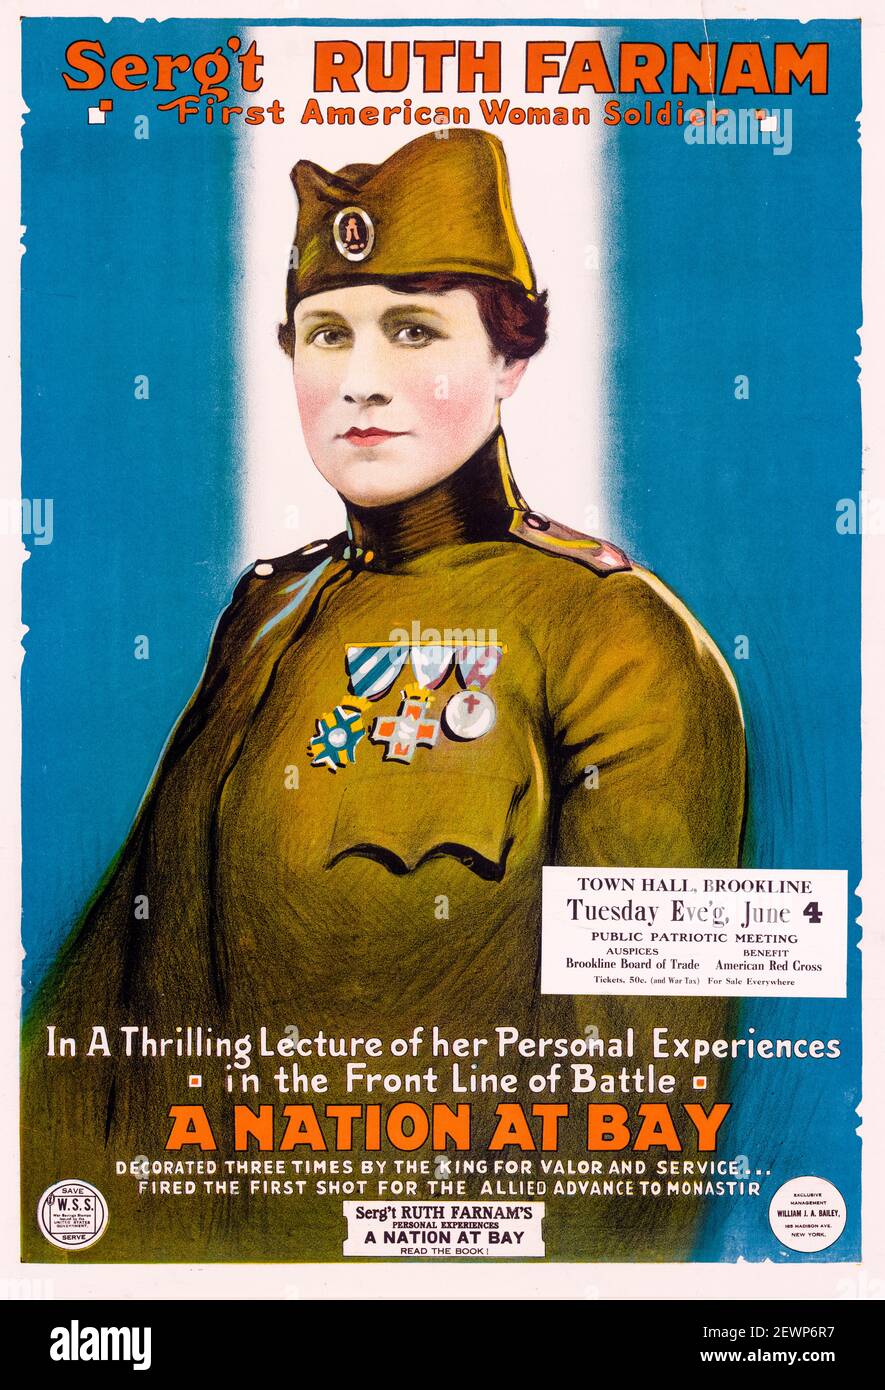 Promotional book tour poster for Sergeant Ruth Stanley Farnam (1873- 1956), the first American female soldier, WW1, 1918 Stock Photo